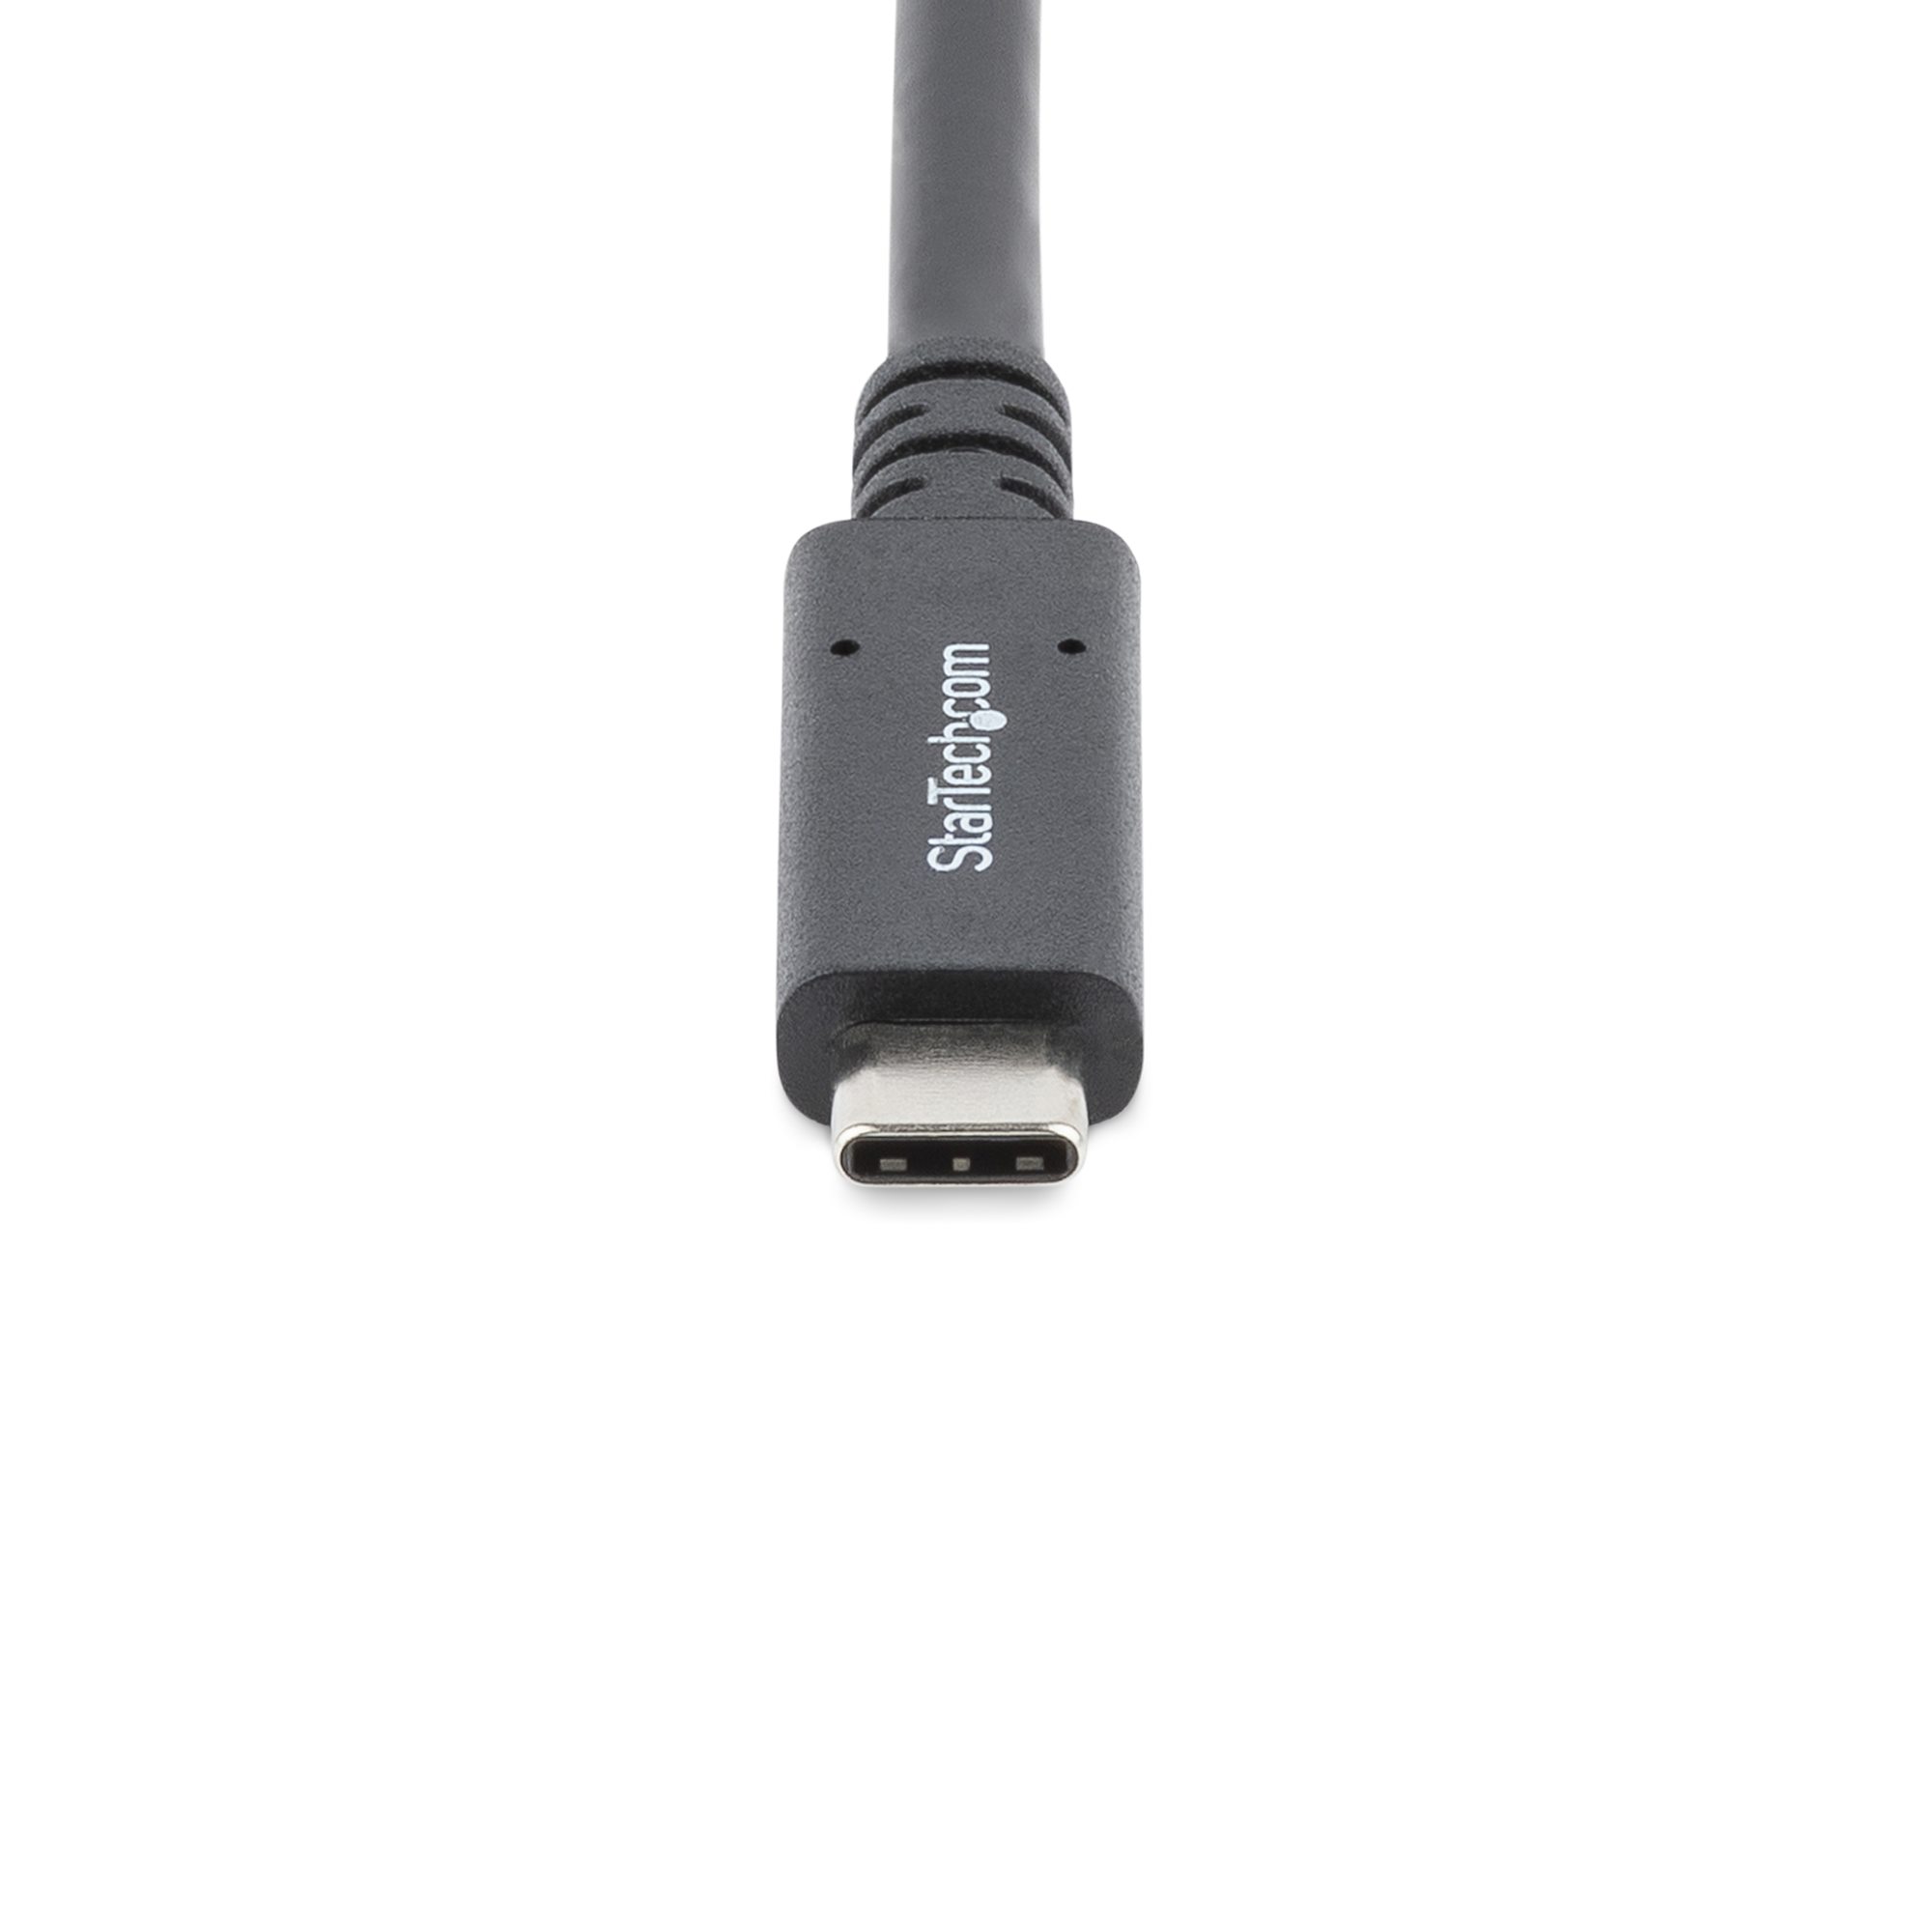 Cable Matters USB C to USB C Monitor Cable 6 ft 100W Power Delivery 1.8m with 4K 60Hz Video Resolution and 5Gbps USB-C 3.1 Gen 1 Data Transfer